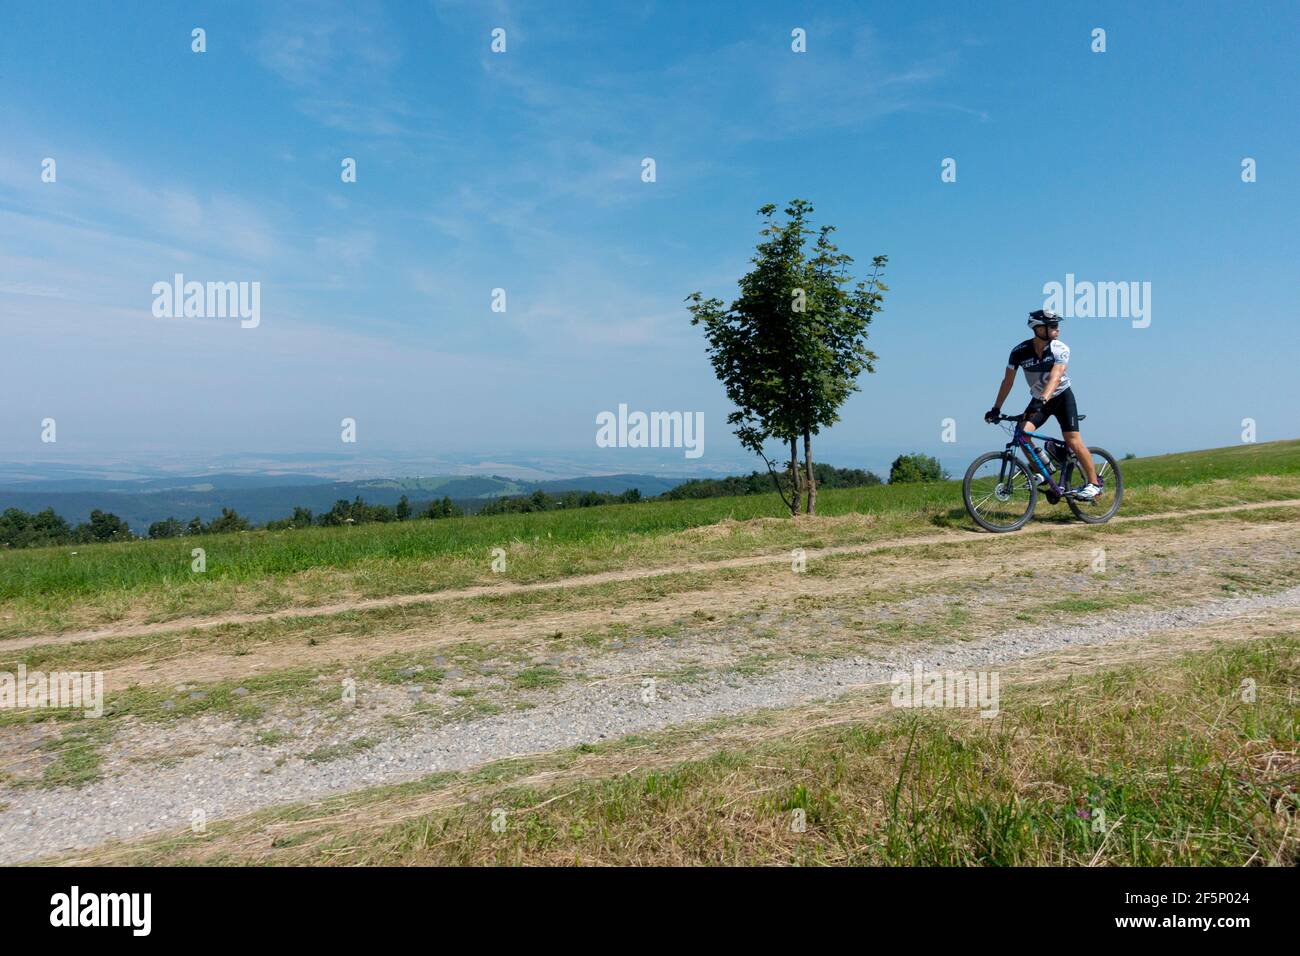 A man cycling alone on a country road in the countryside with a small tree by the road, lifestyle in a nice day, biker Stock Photo